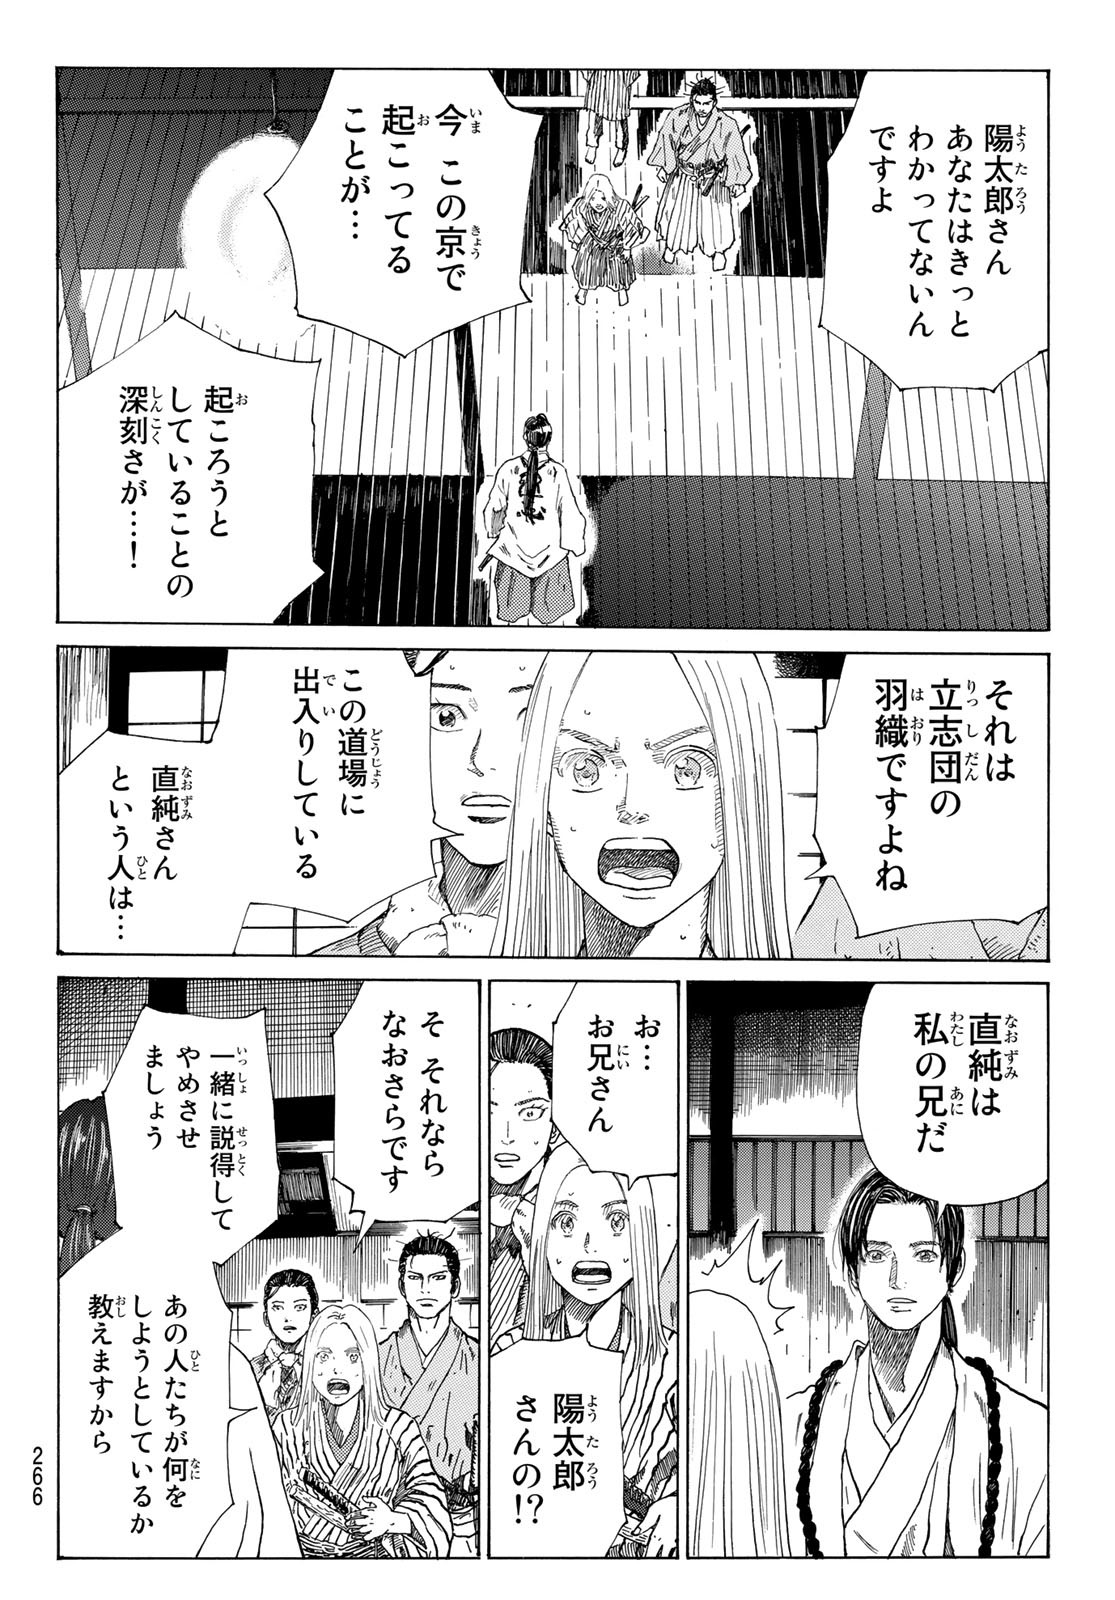 An Mo Miburo 第60話 - Page 6